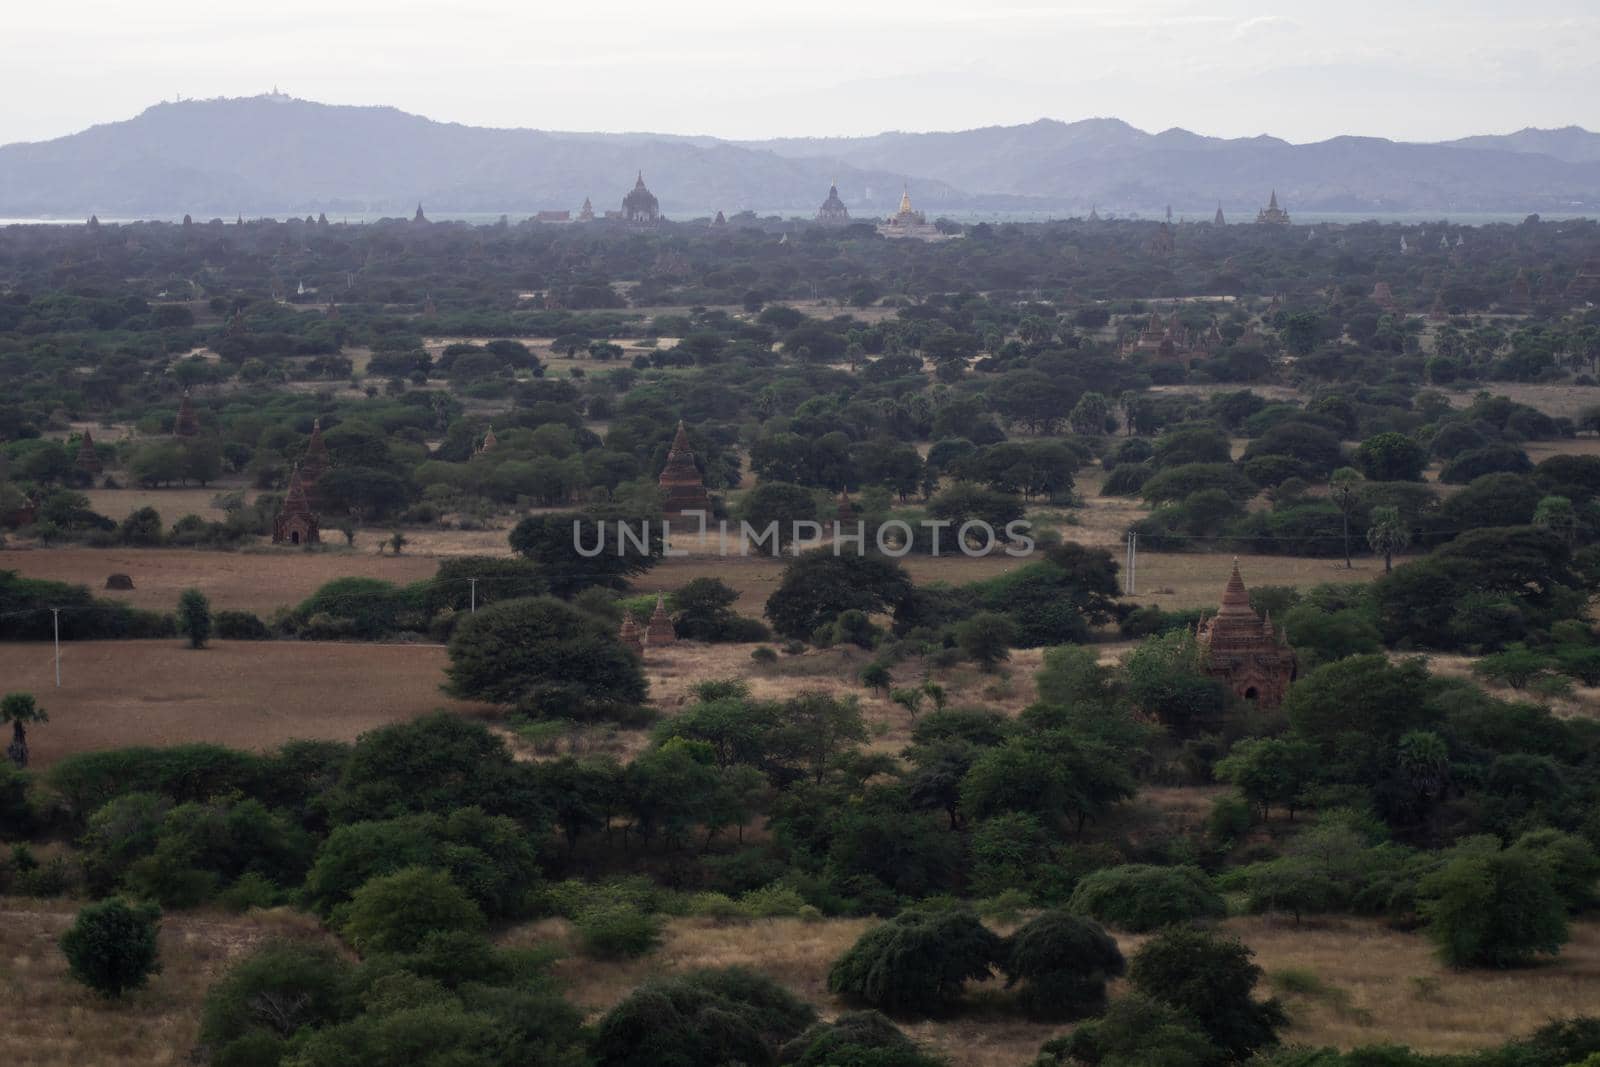 Looking out over Bagan from the Nan Myint viewing tower by arvidnorberg